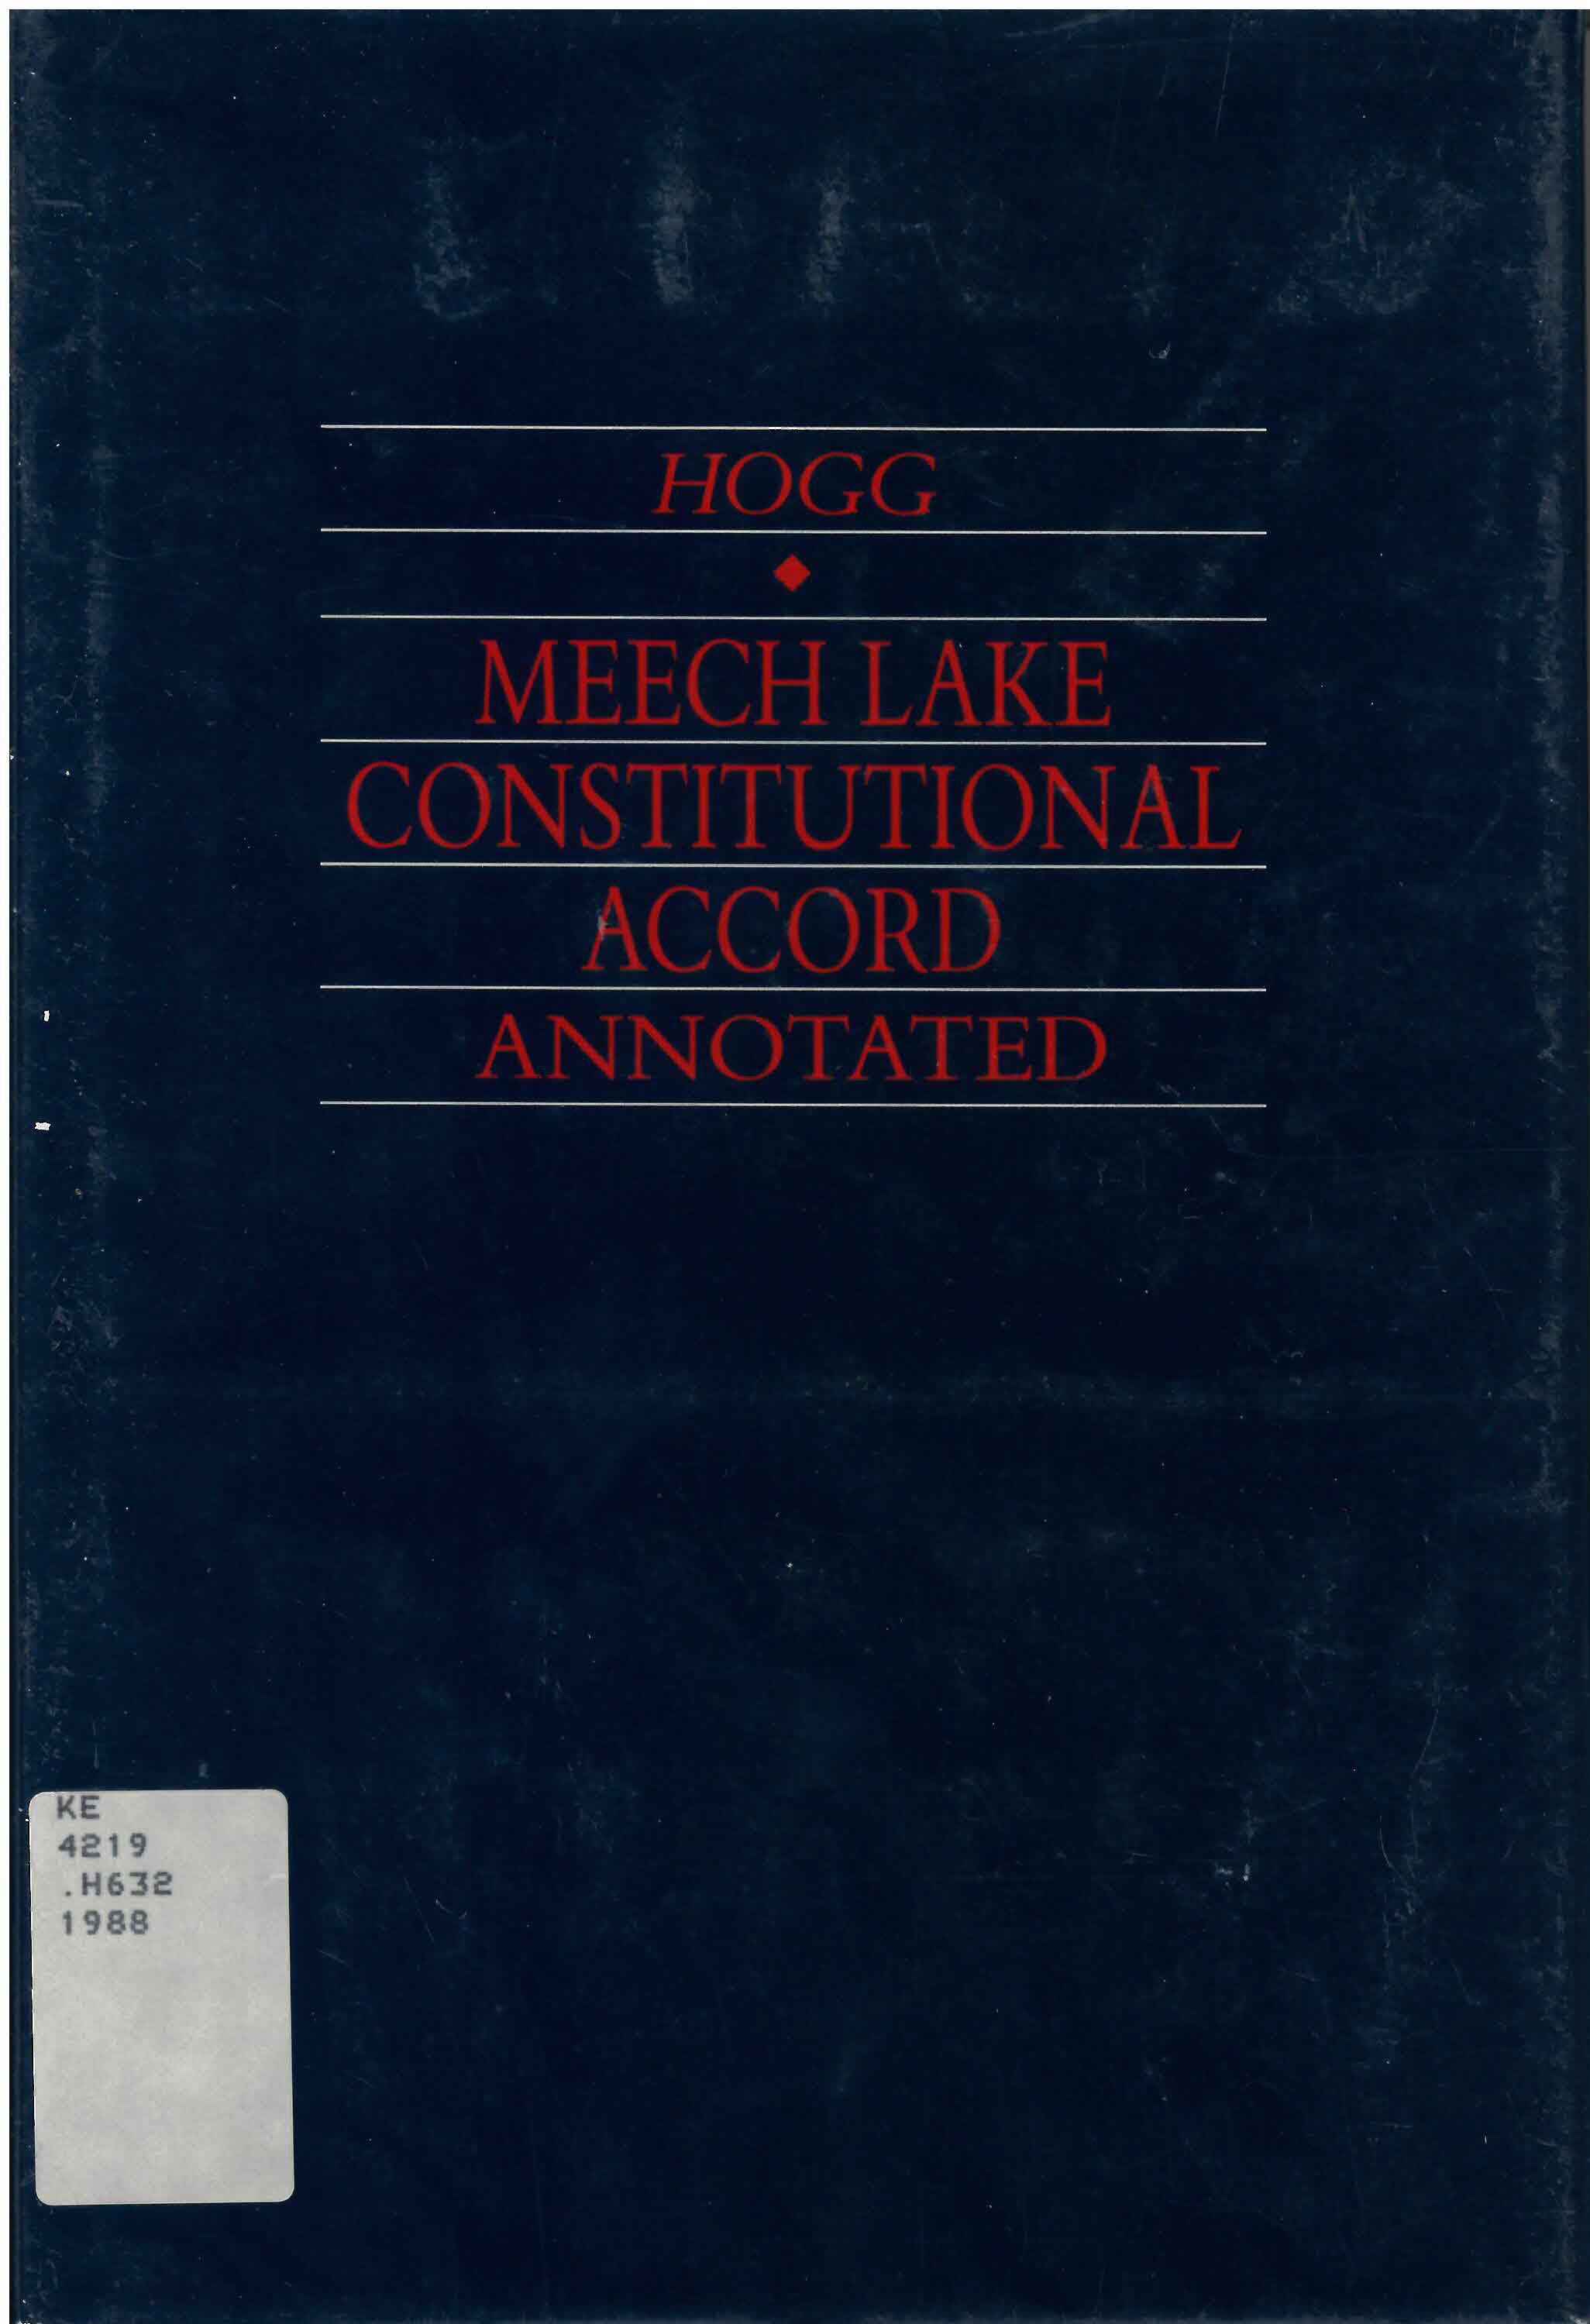 Meech Lake Constitutional Accord annotated